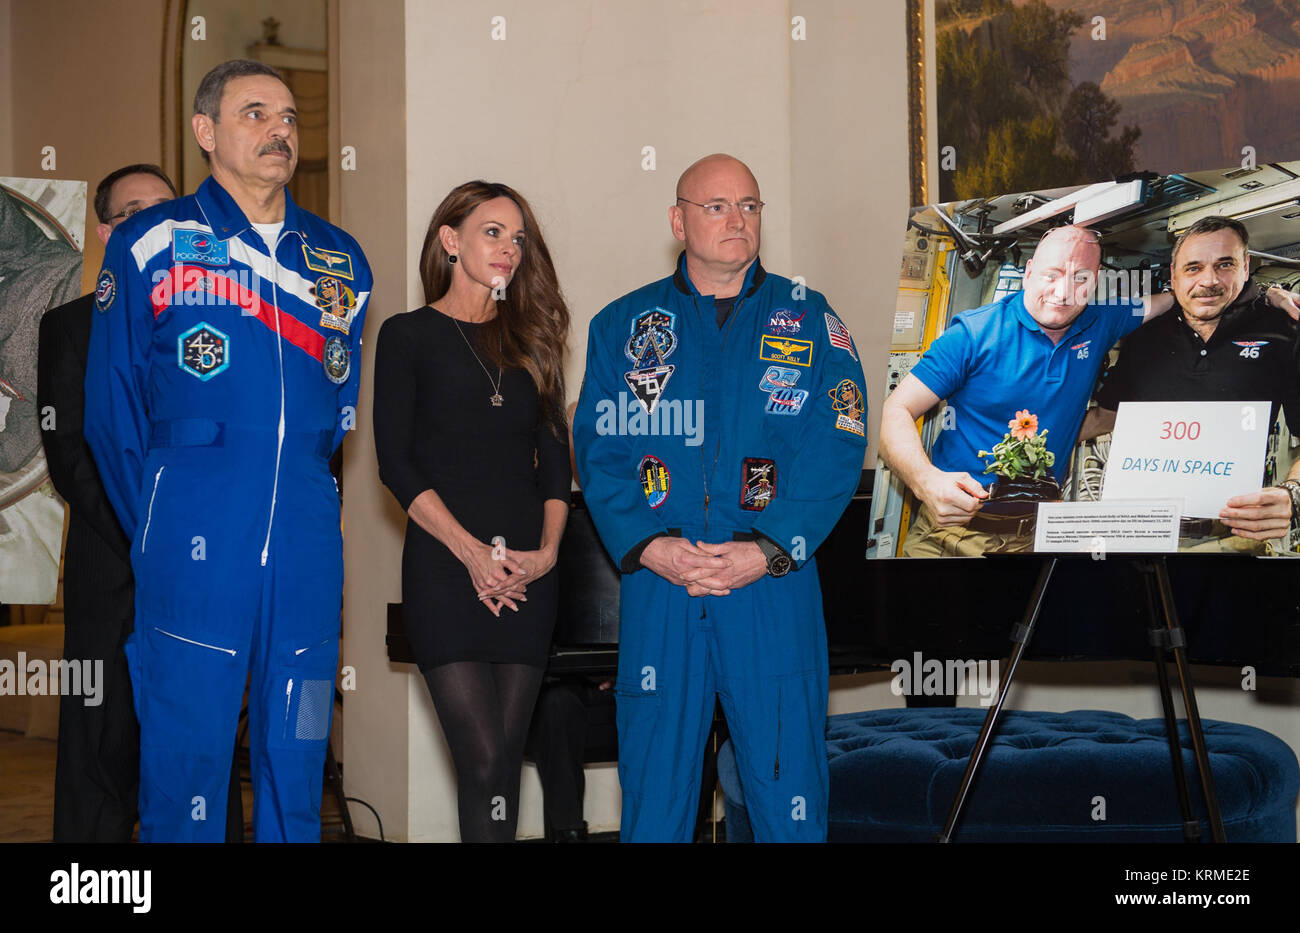 Russian cosmonaut Mikhail Kornienko of Roscosmos, left, and NASA astronaut Scott Kelly, right, are seen next to a photo of them aboard the International Space Station, at an event celebrating the strength and stability of the space station’s international partnership, Thursday, March 24, 2016, at the Spaso house in Moscow, Russia. Mariella Tefft, wife of U.S. Ambassador John Tefft, hosted the event that was attended by Head of Roscosmos, Igor Komarov, NASA Administrator Charles Bolden, and other leadership. Photo Credit: (NASA/AubreyGemignani) Spaso House Reception for International Space Stat Stock Photo